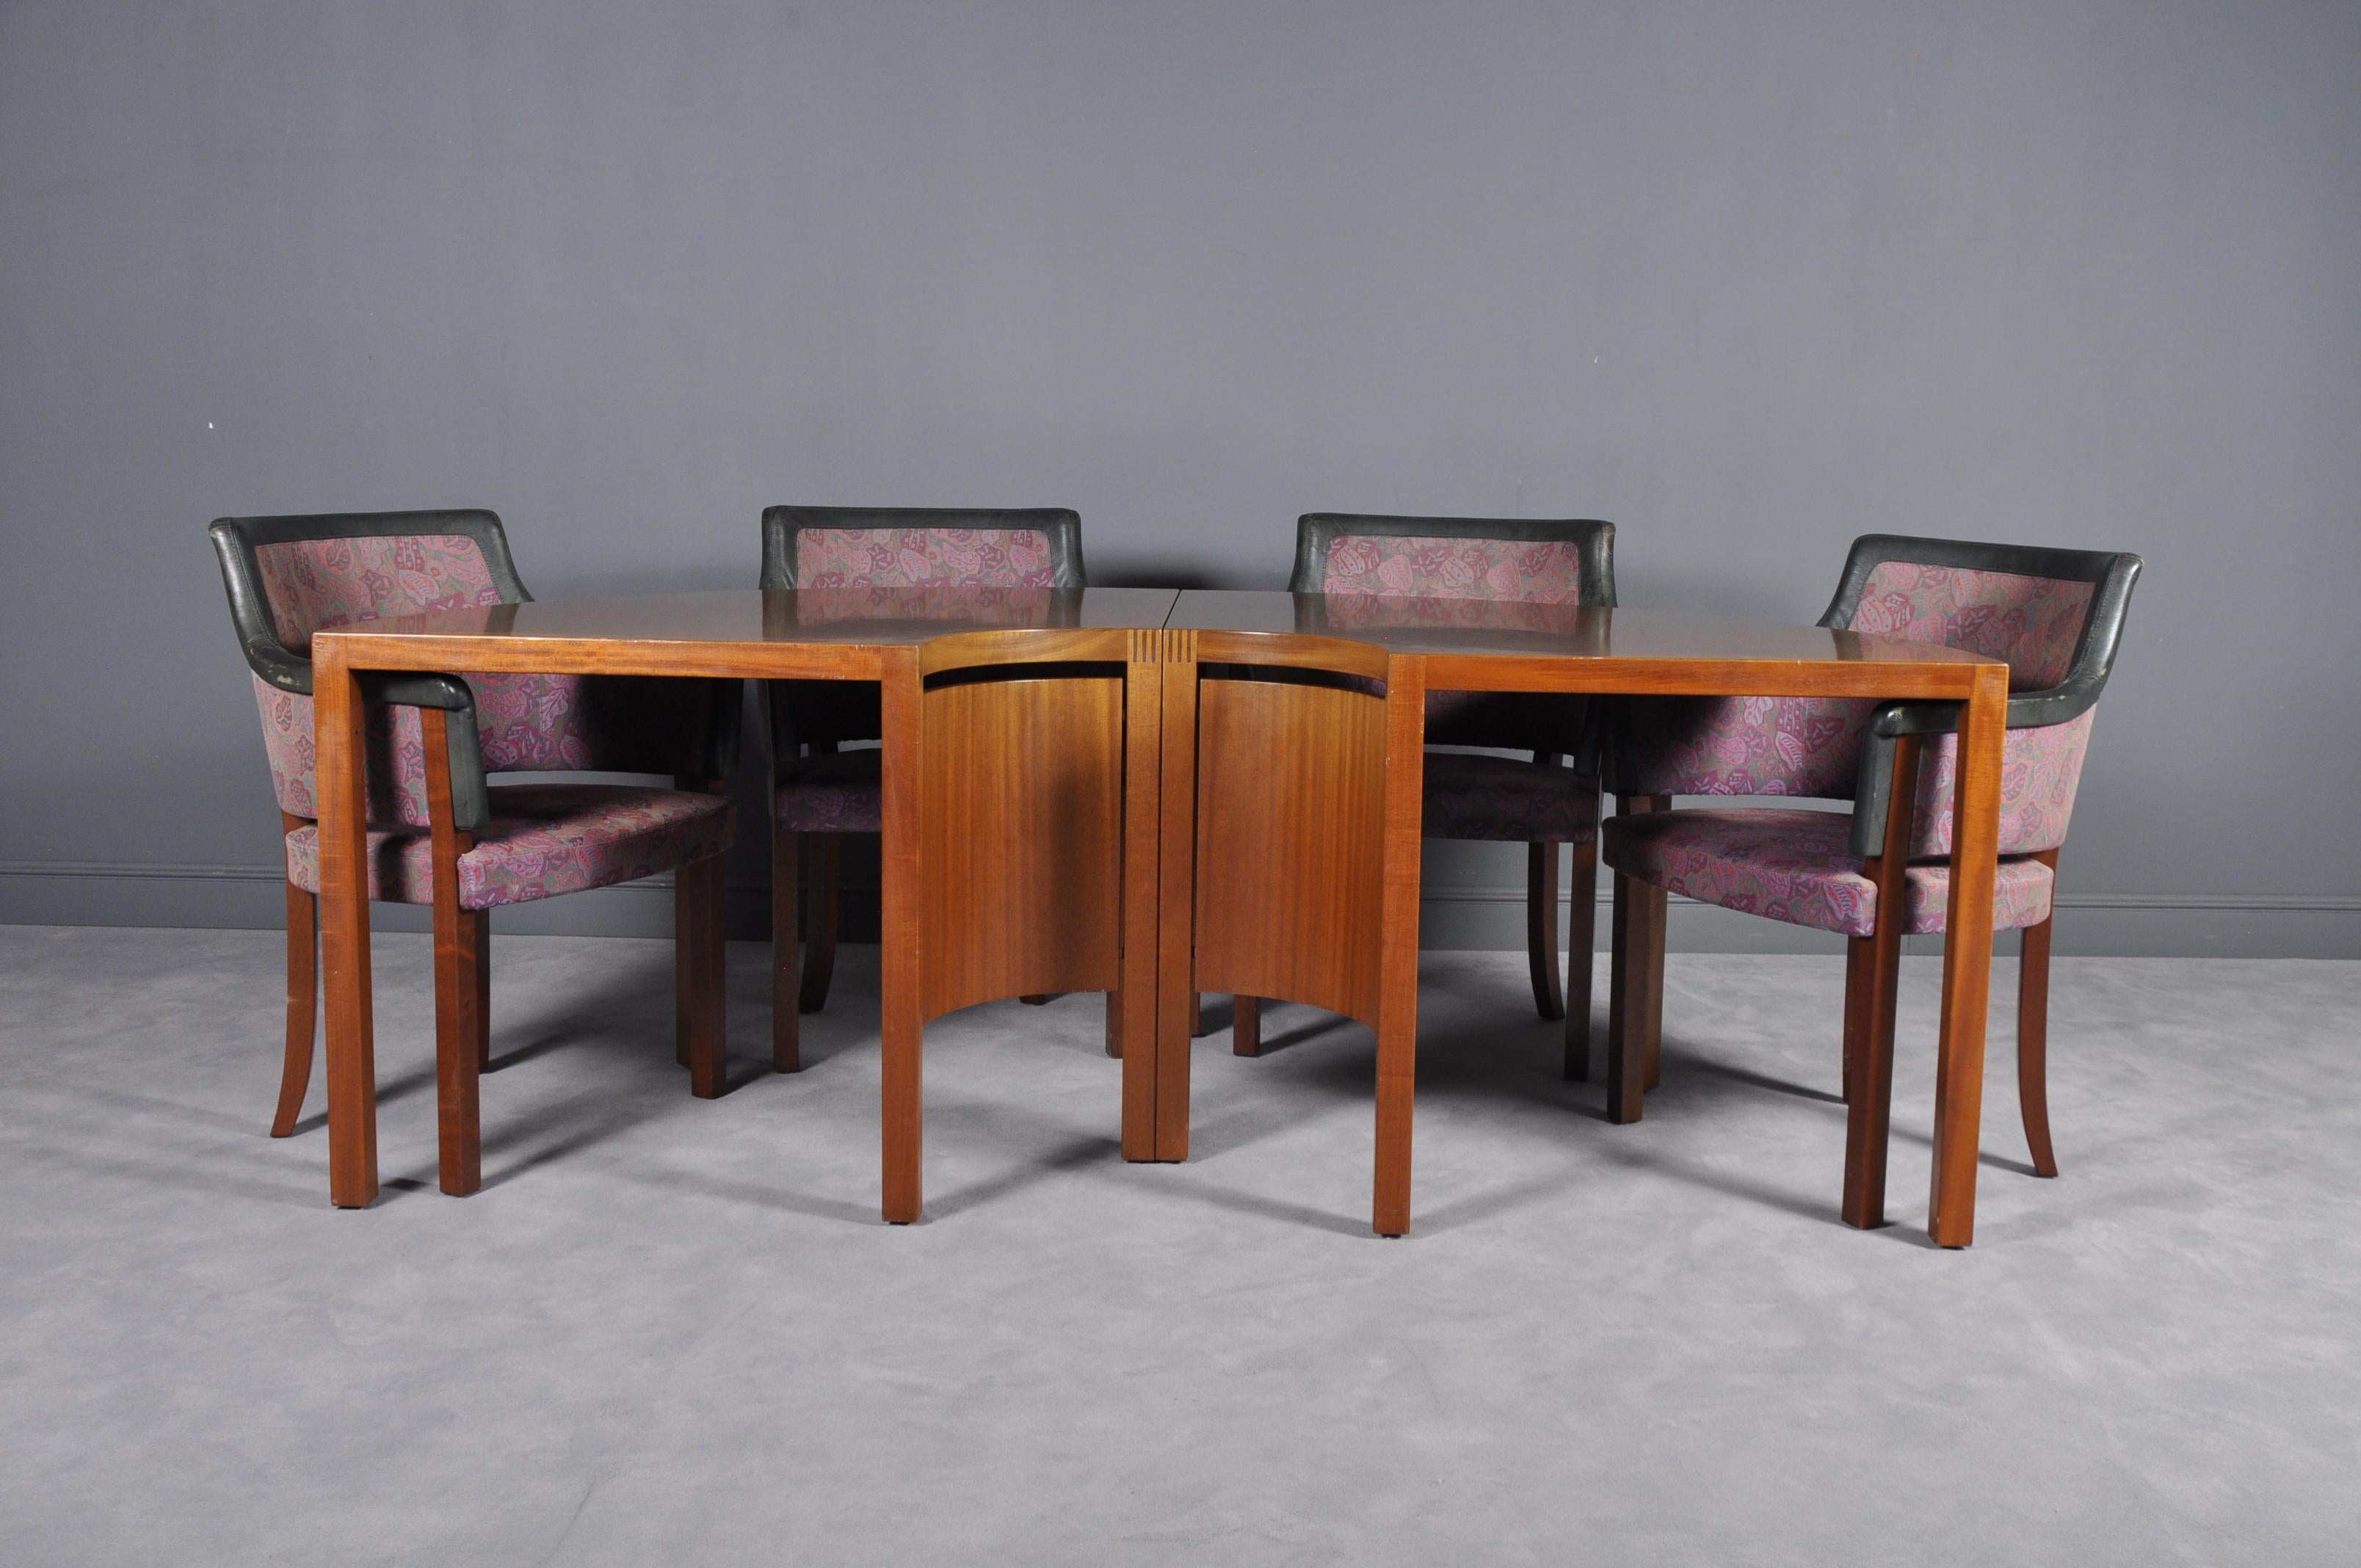 Measures: Conference table-D 200 / H 70 cm

Chairs-W 60 / D 60 / H 85 cm, seat H 45 cm

Executive chair-W 60 / D 60 / H 95 cm, seat H 45 cm

Set of four-piece sectional conference table and eight “Riksdagen” chairs designed by Åke Axelsson for